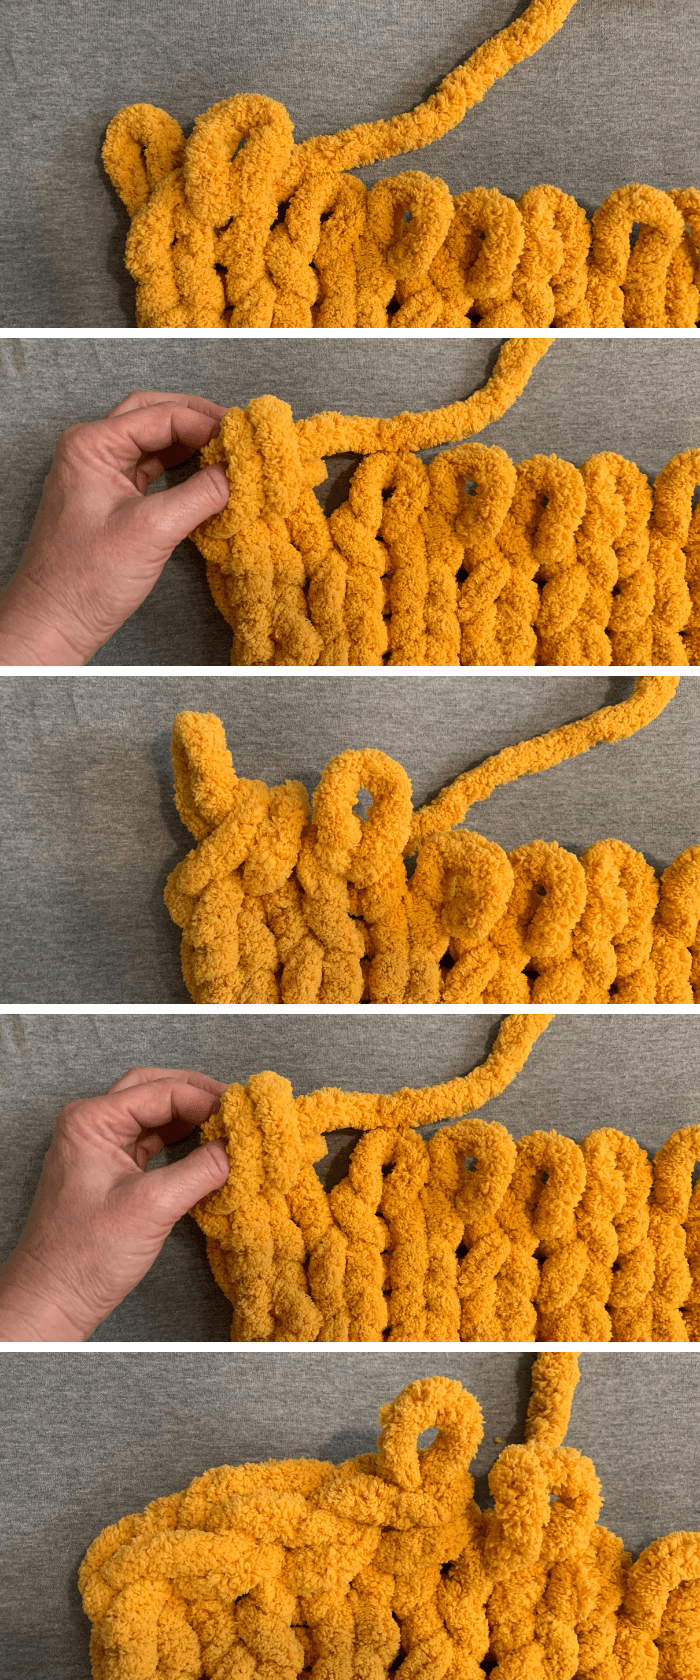 how to finish a chunky hand knitted blanket